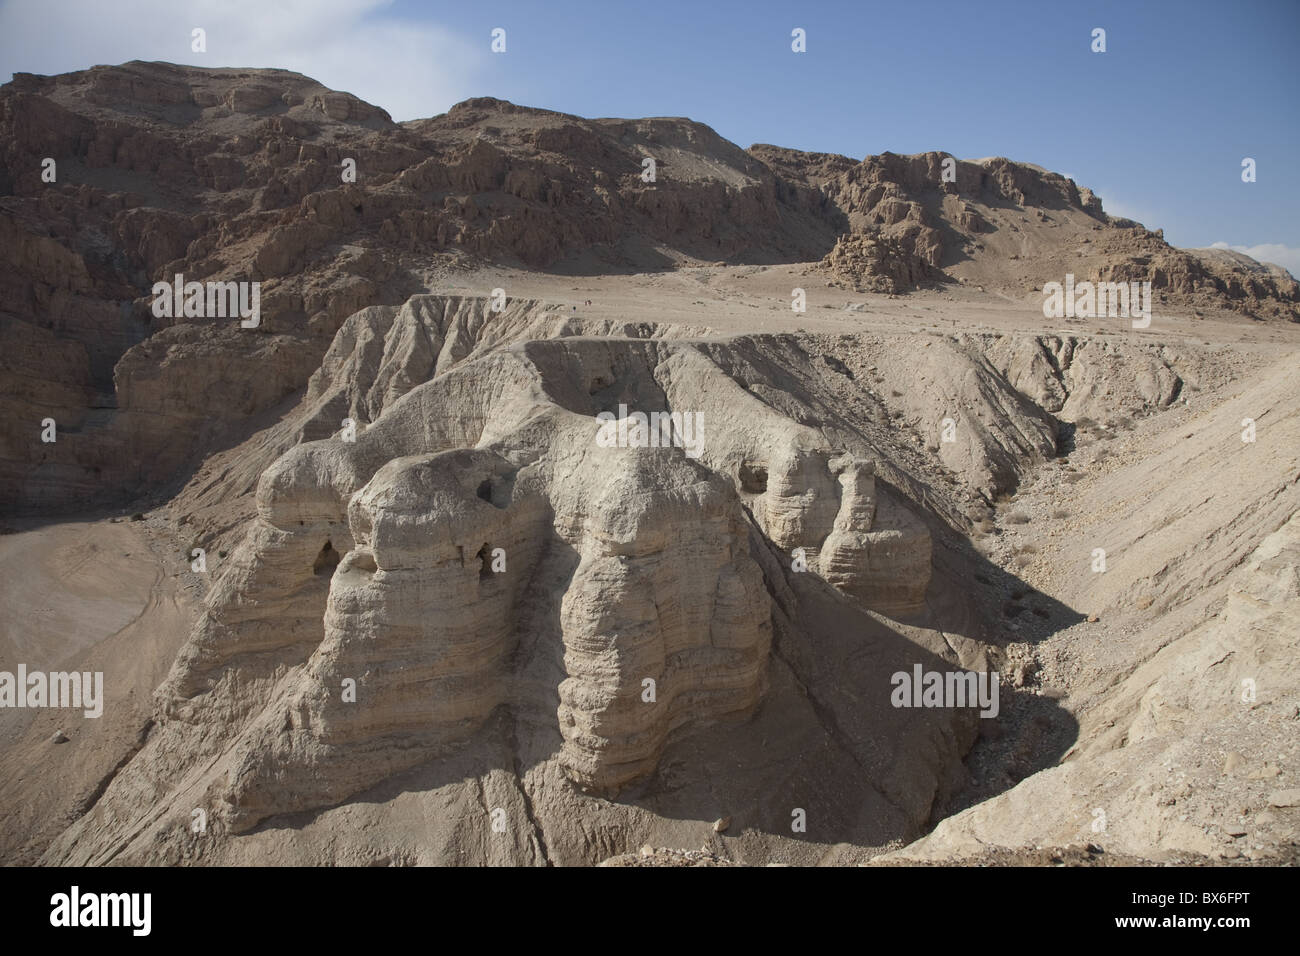 Caves of Qumran in the Judean Desert, near the Dead Sea, Israel, Middle East Stock Photo